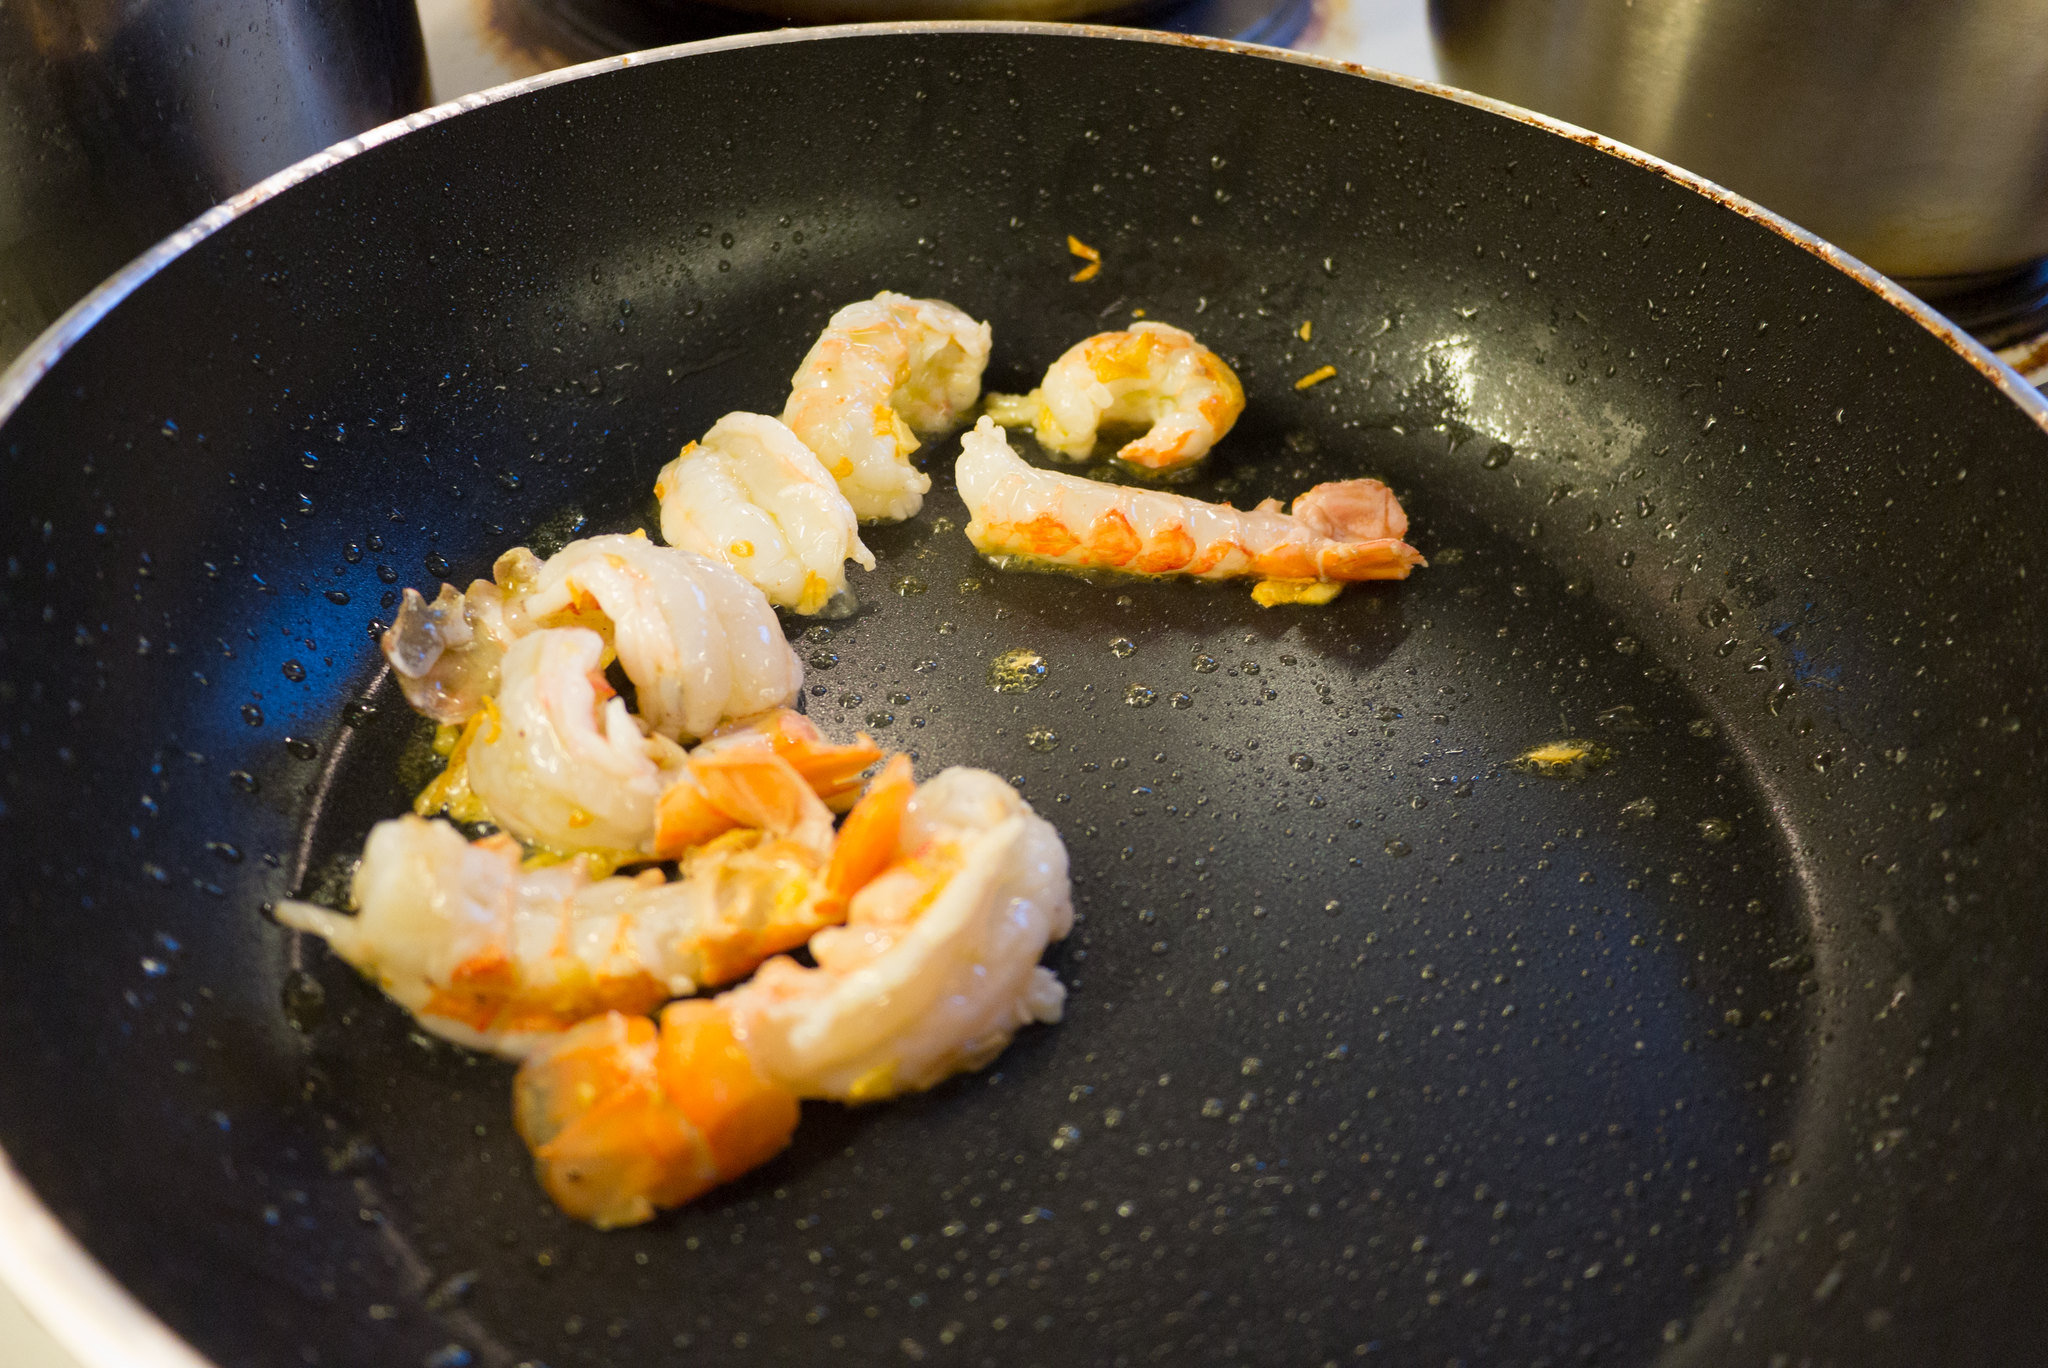 Tails: I love the ivory color and texture of the Icelandic Lobster